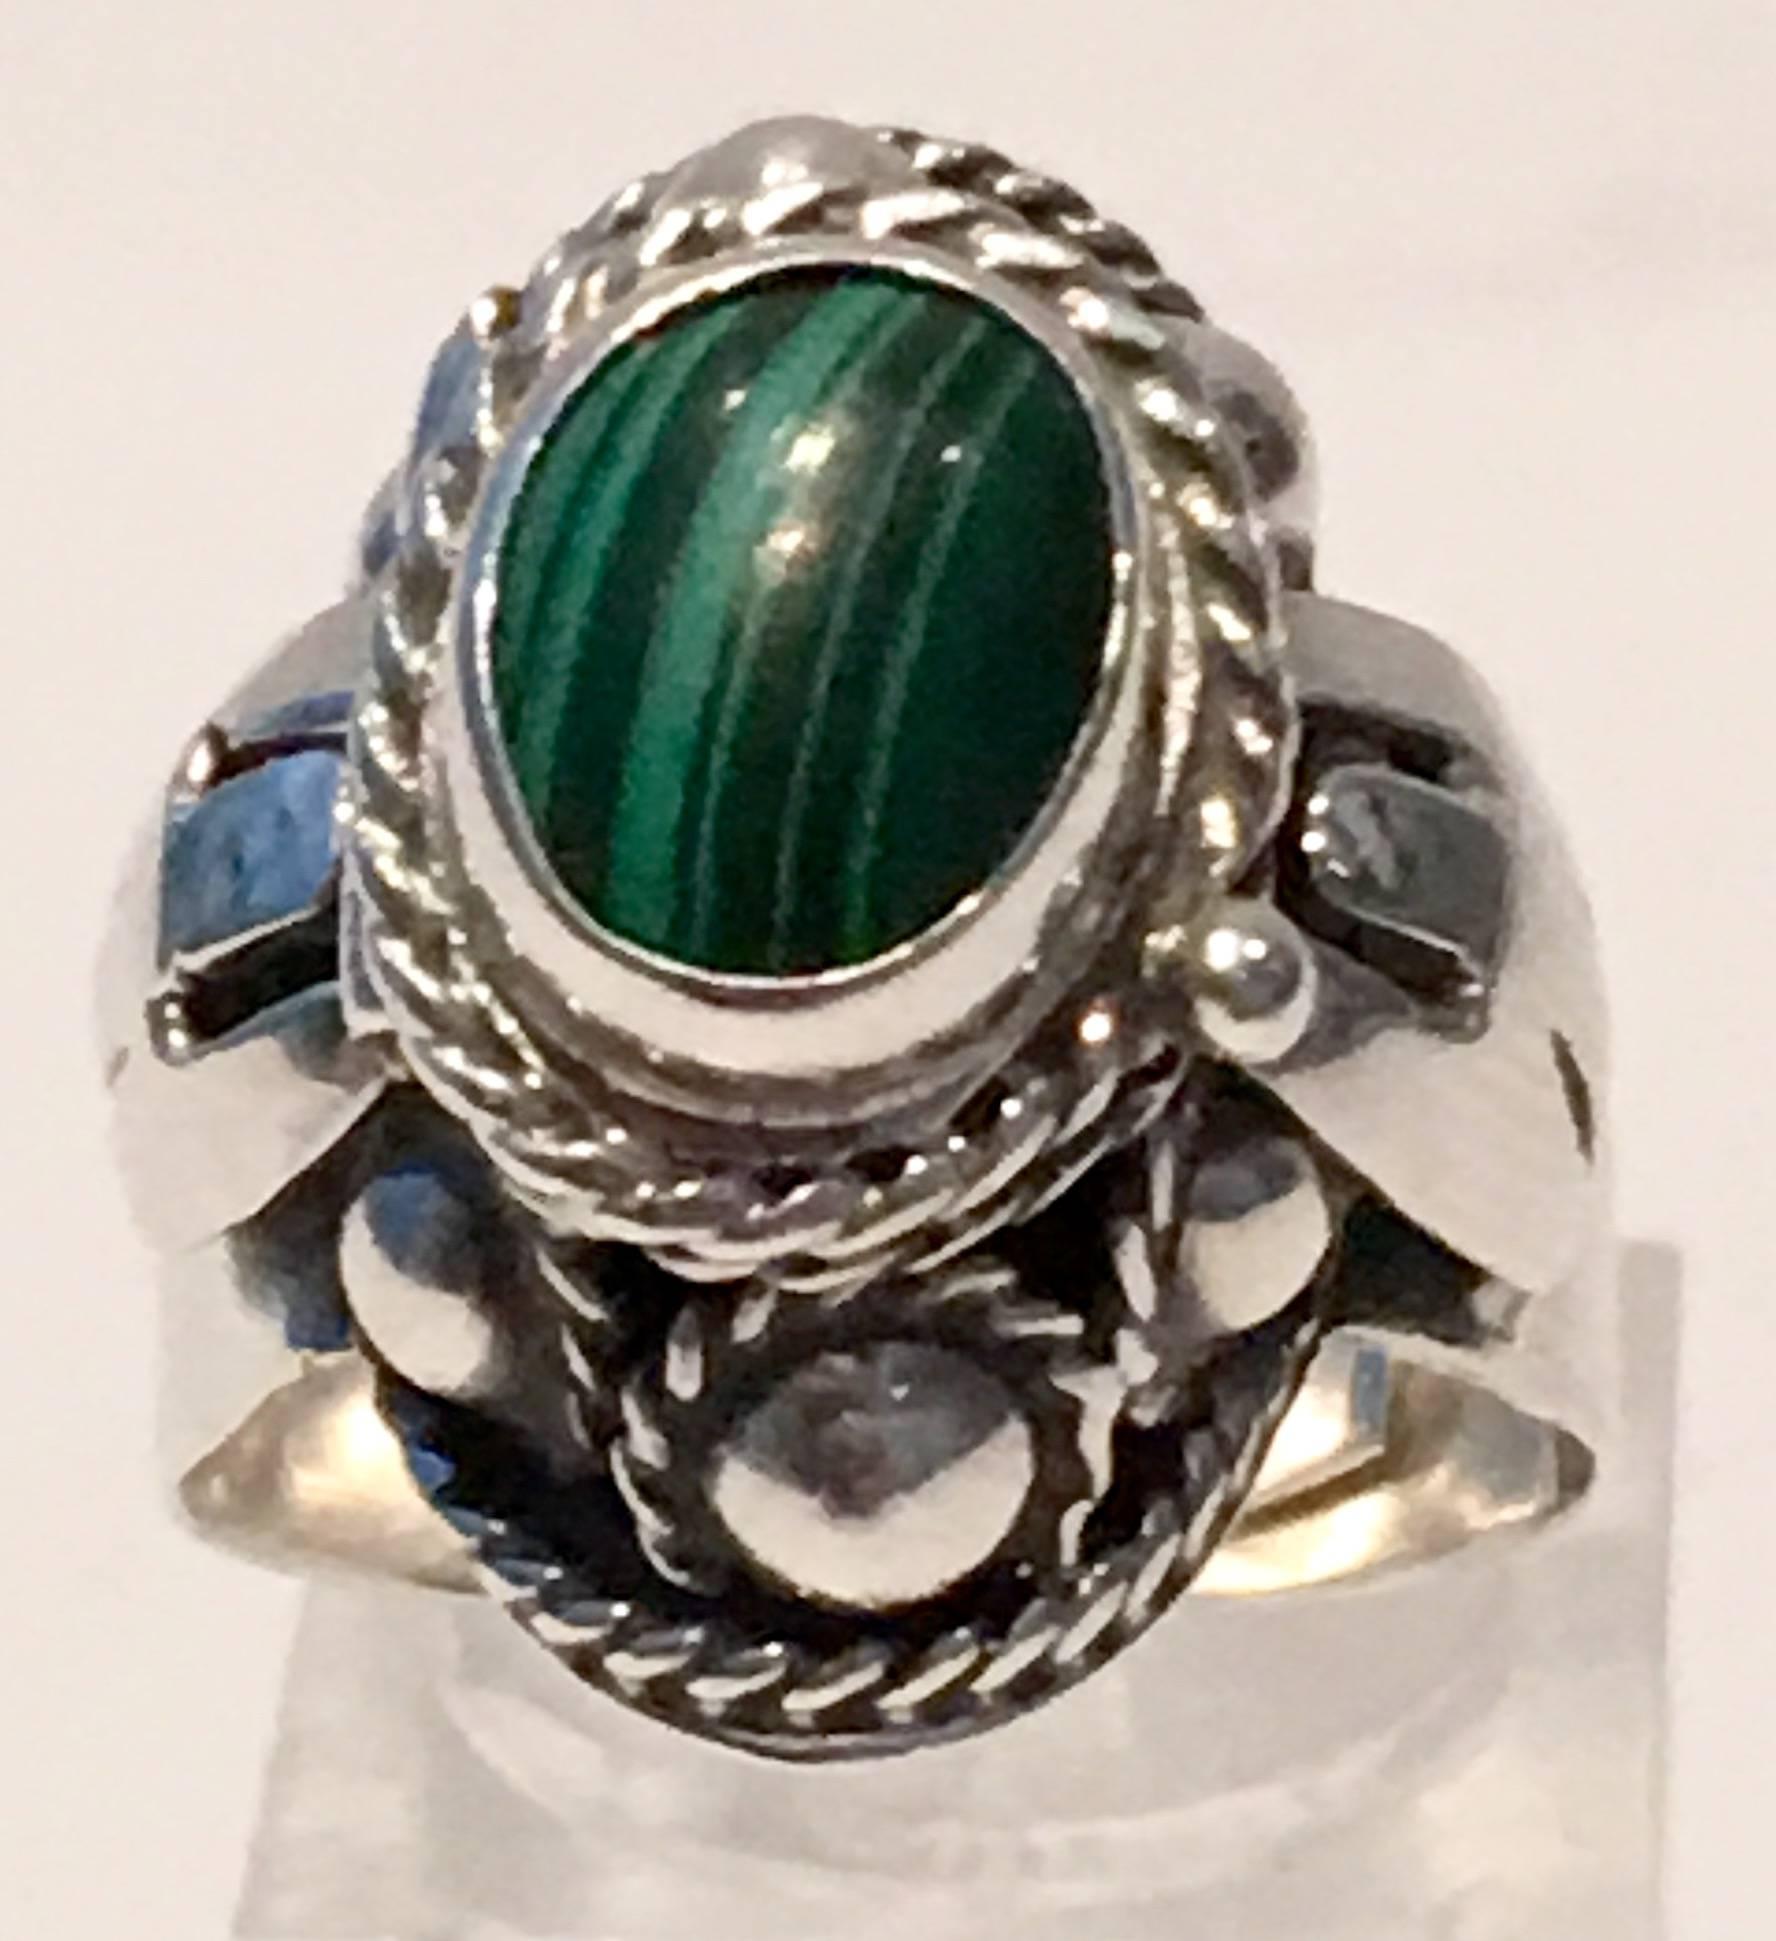 1960'S Sterling silver and malachite stone poison ring. Top of ring is on a hinge that opens like a locket. Malachite stone is approximately .25"D. Artist signed "925 T J 68 Mexico." Adjustable to fit almost any size, currently set at